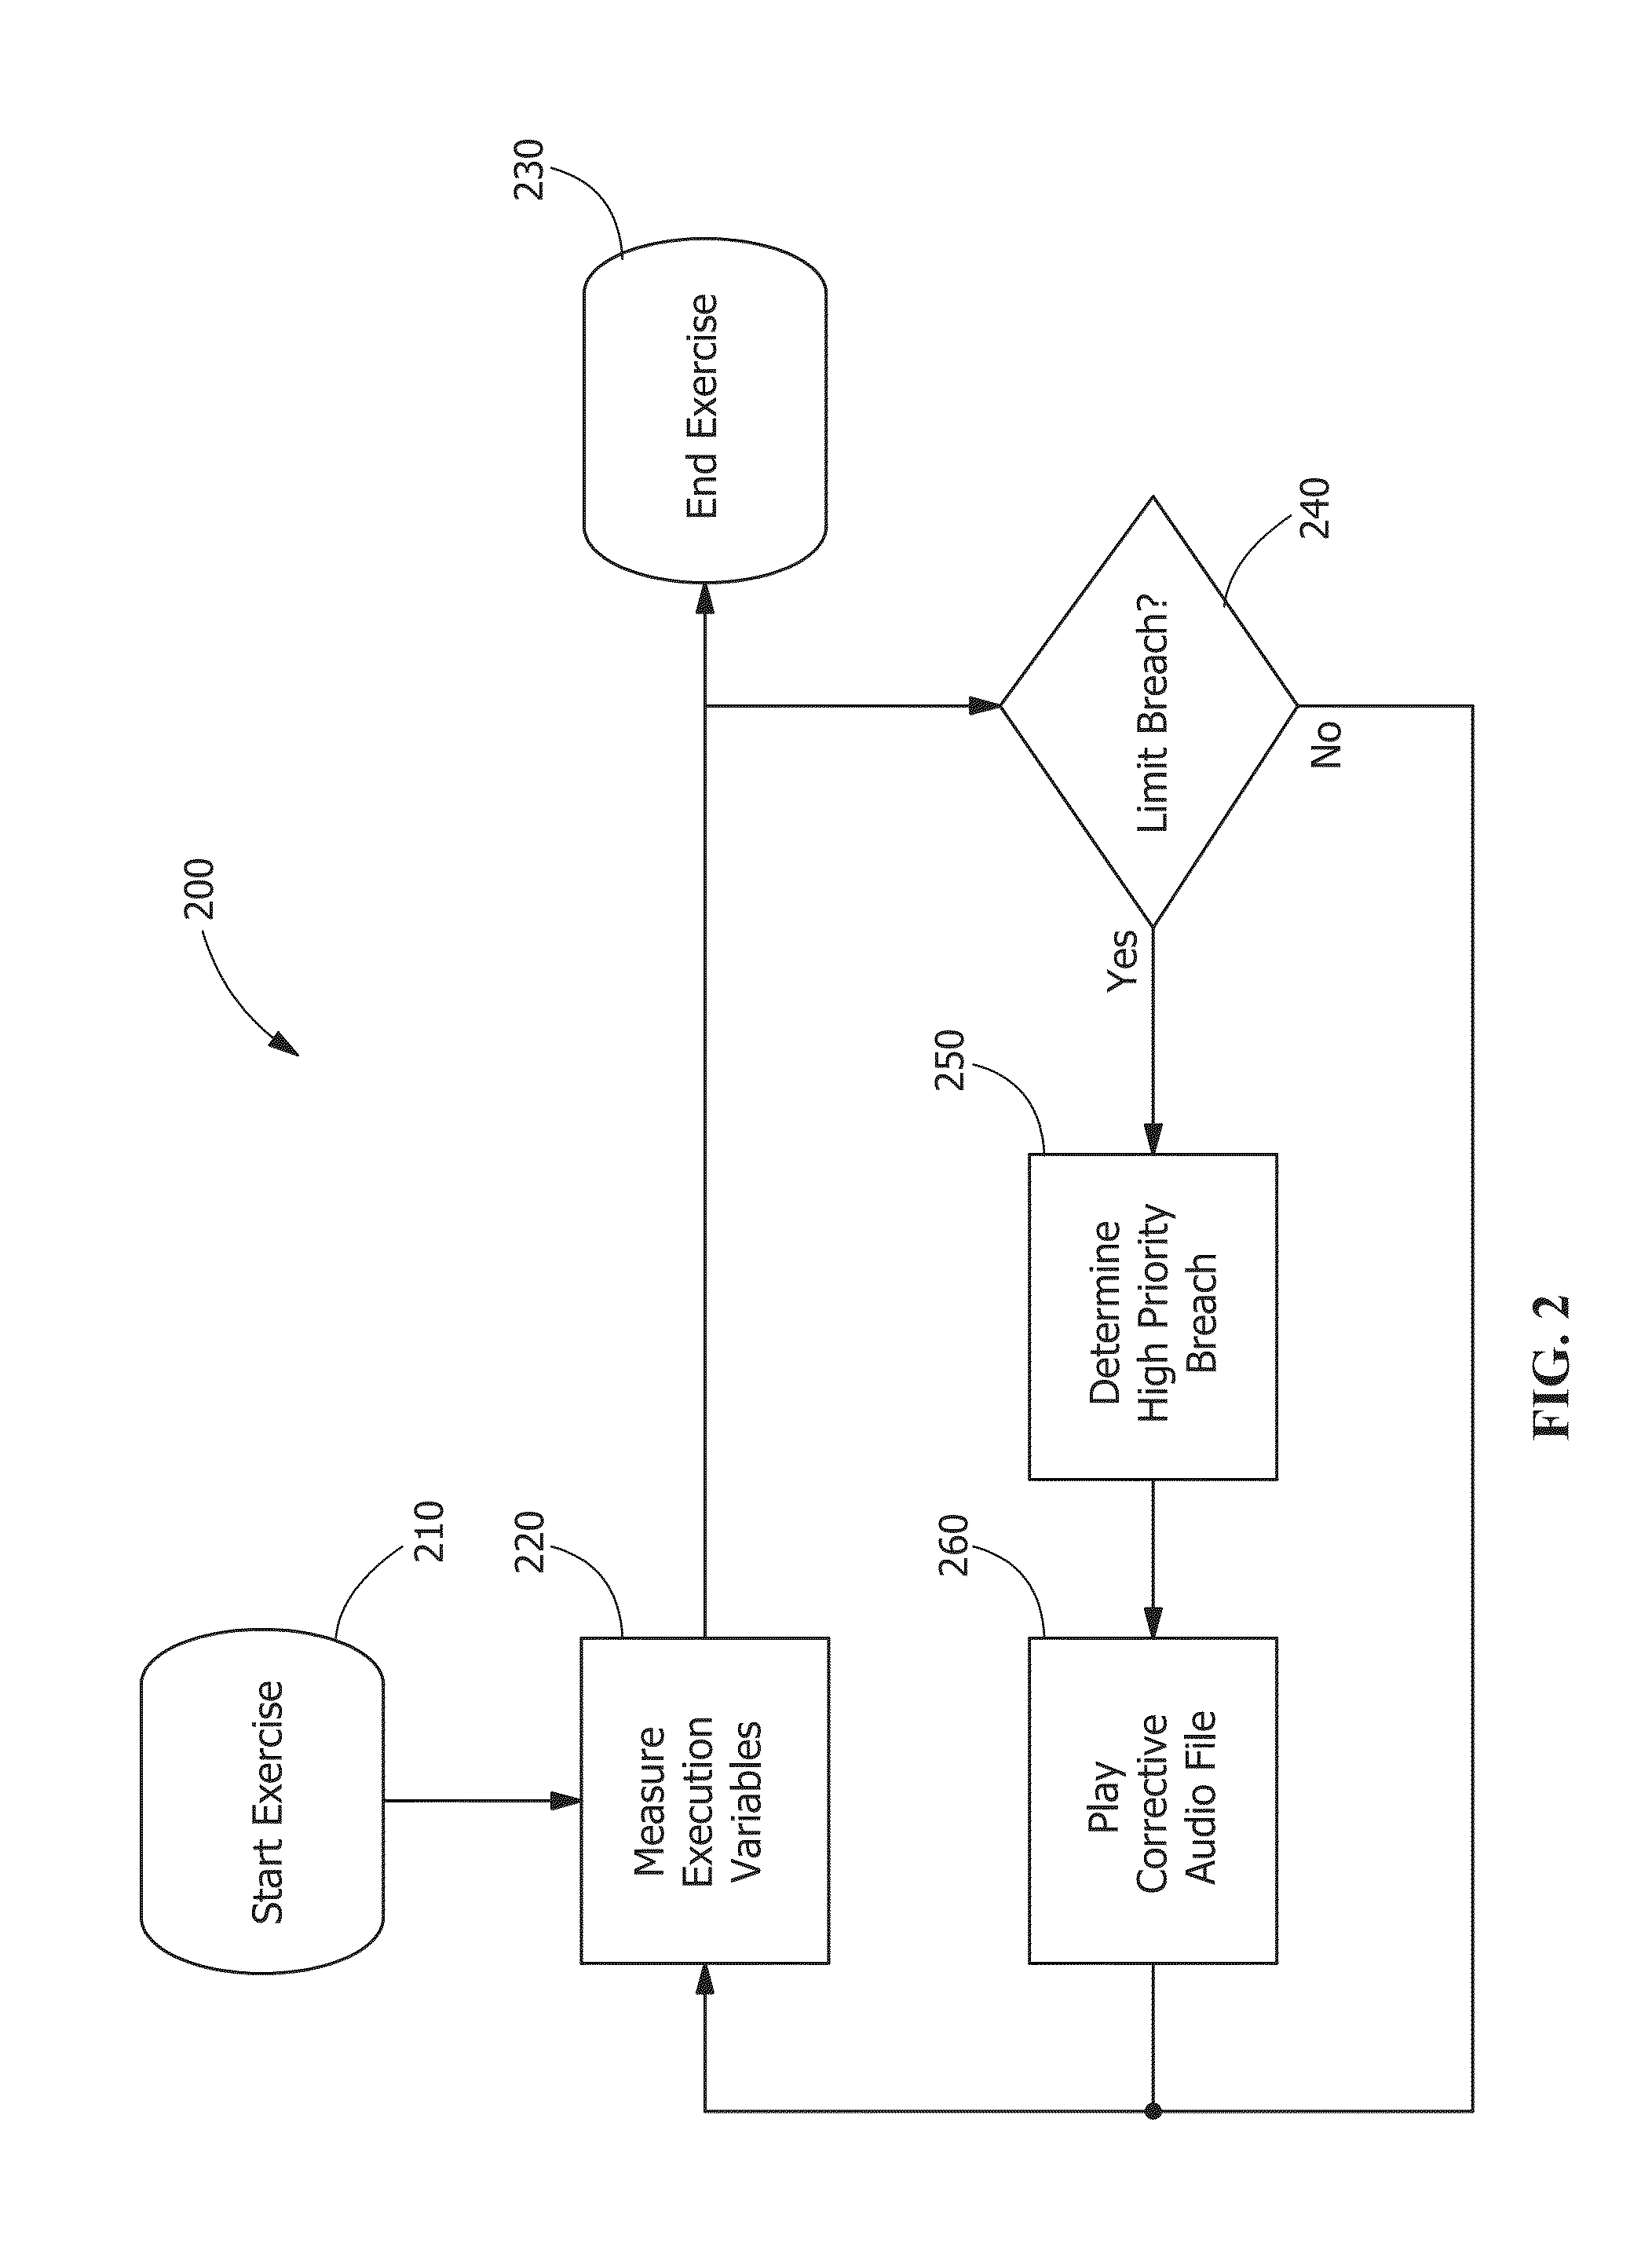 System and method monitoring and characterizing manual welding operations